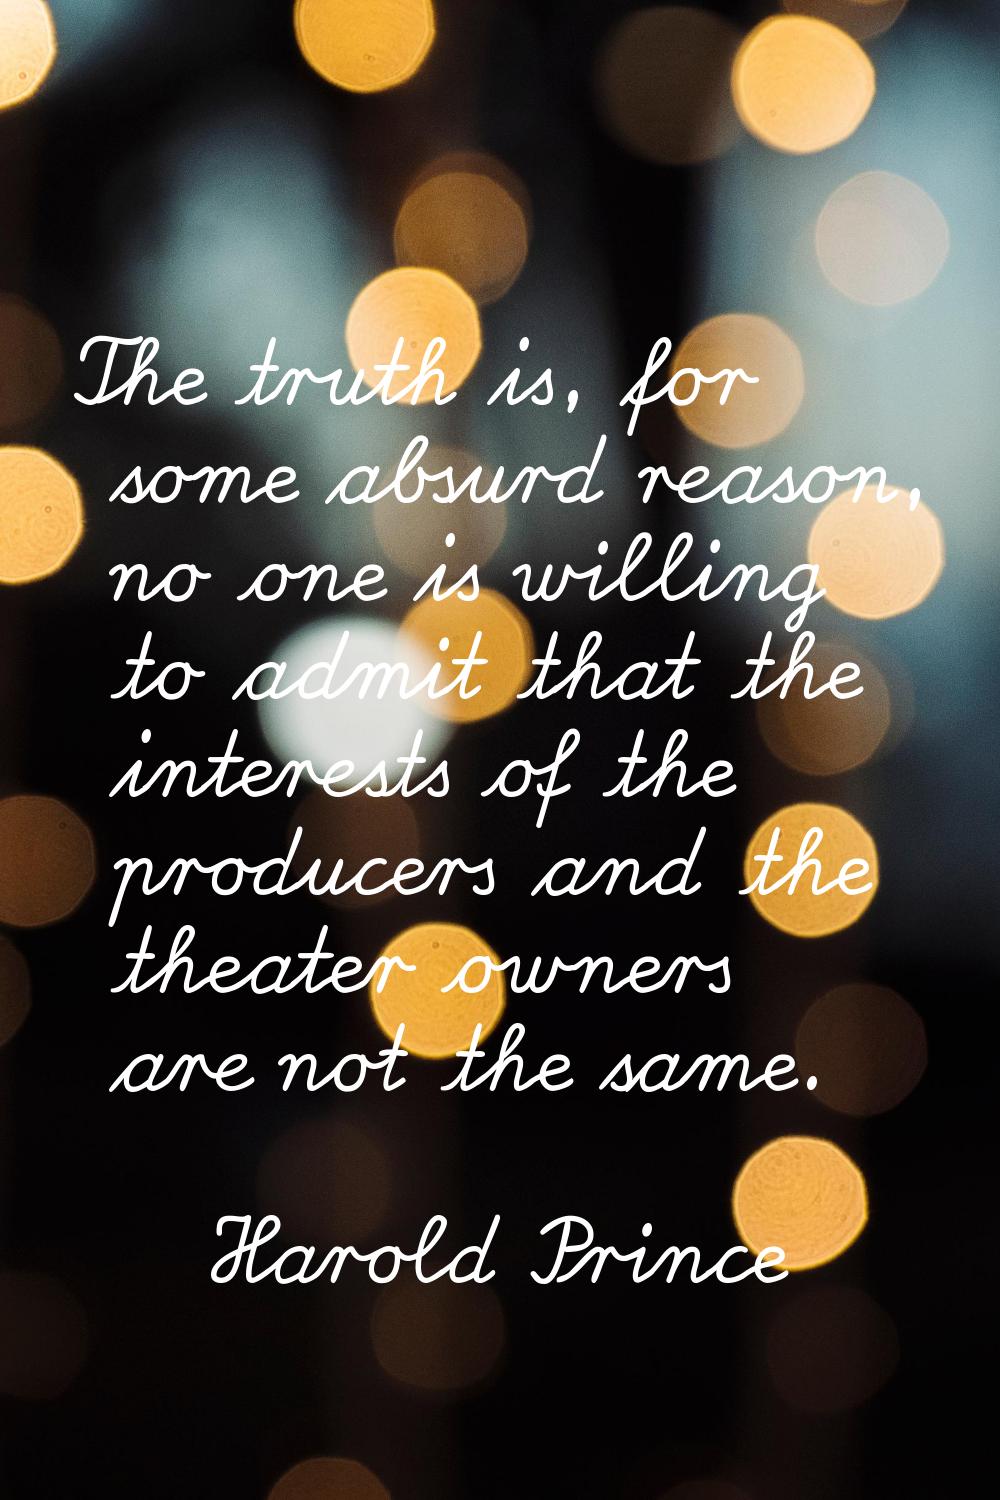 The truth is, for some absurd reason, no one is willing to admit that the interests of the producer